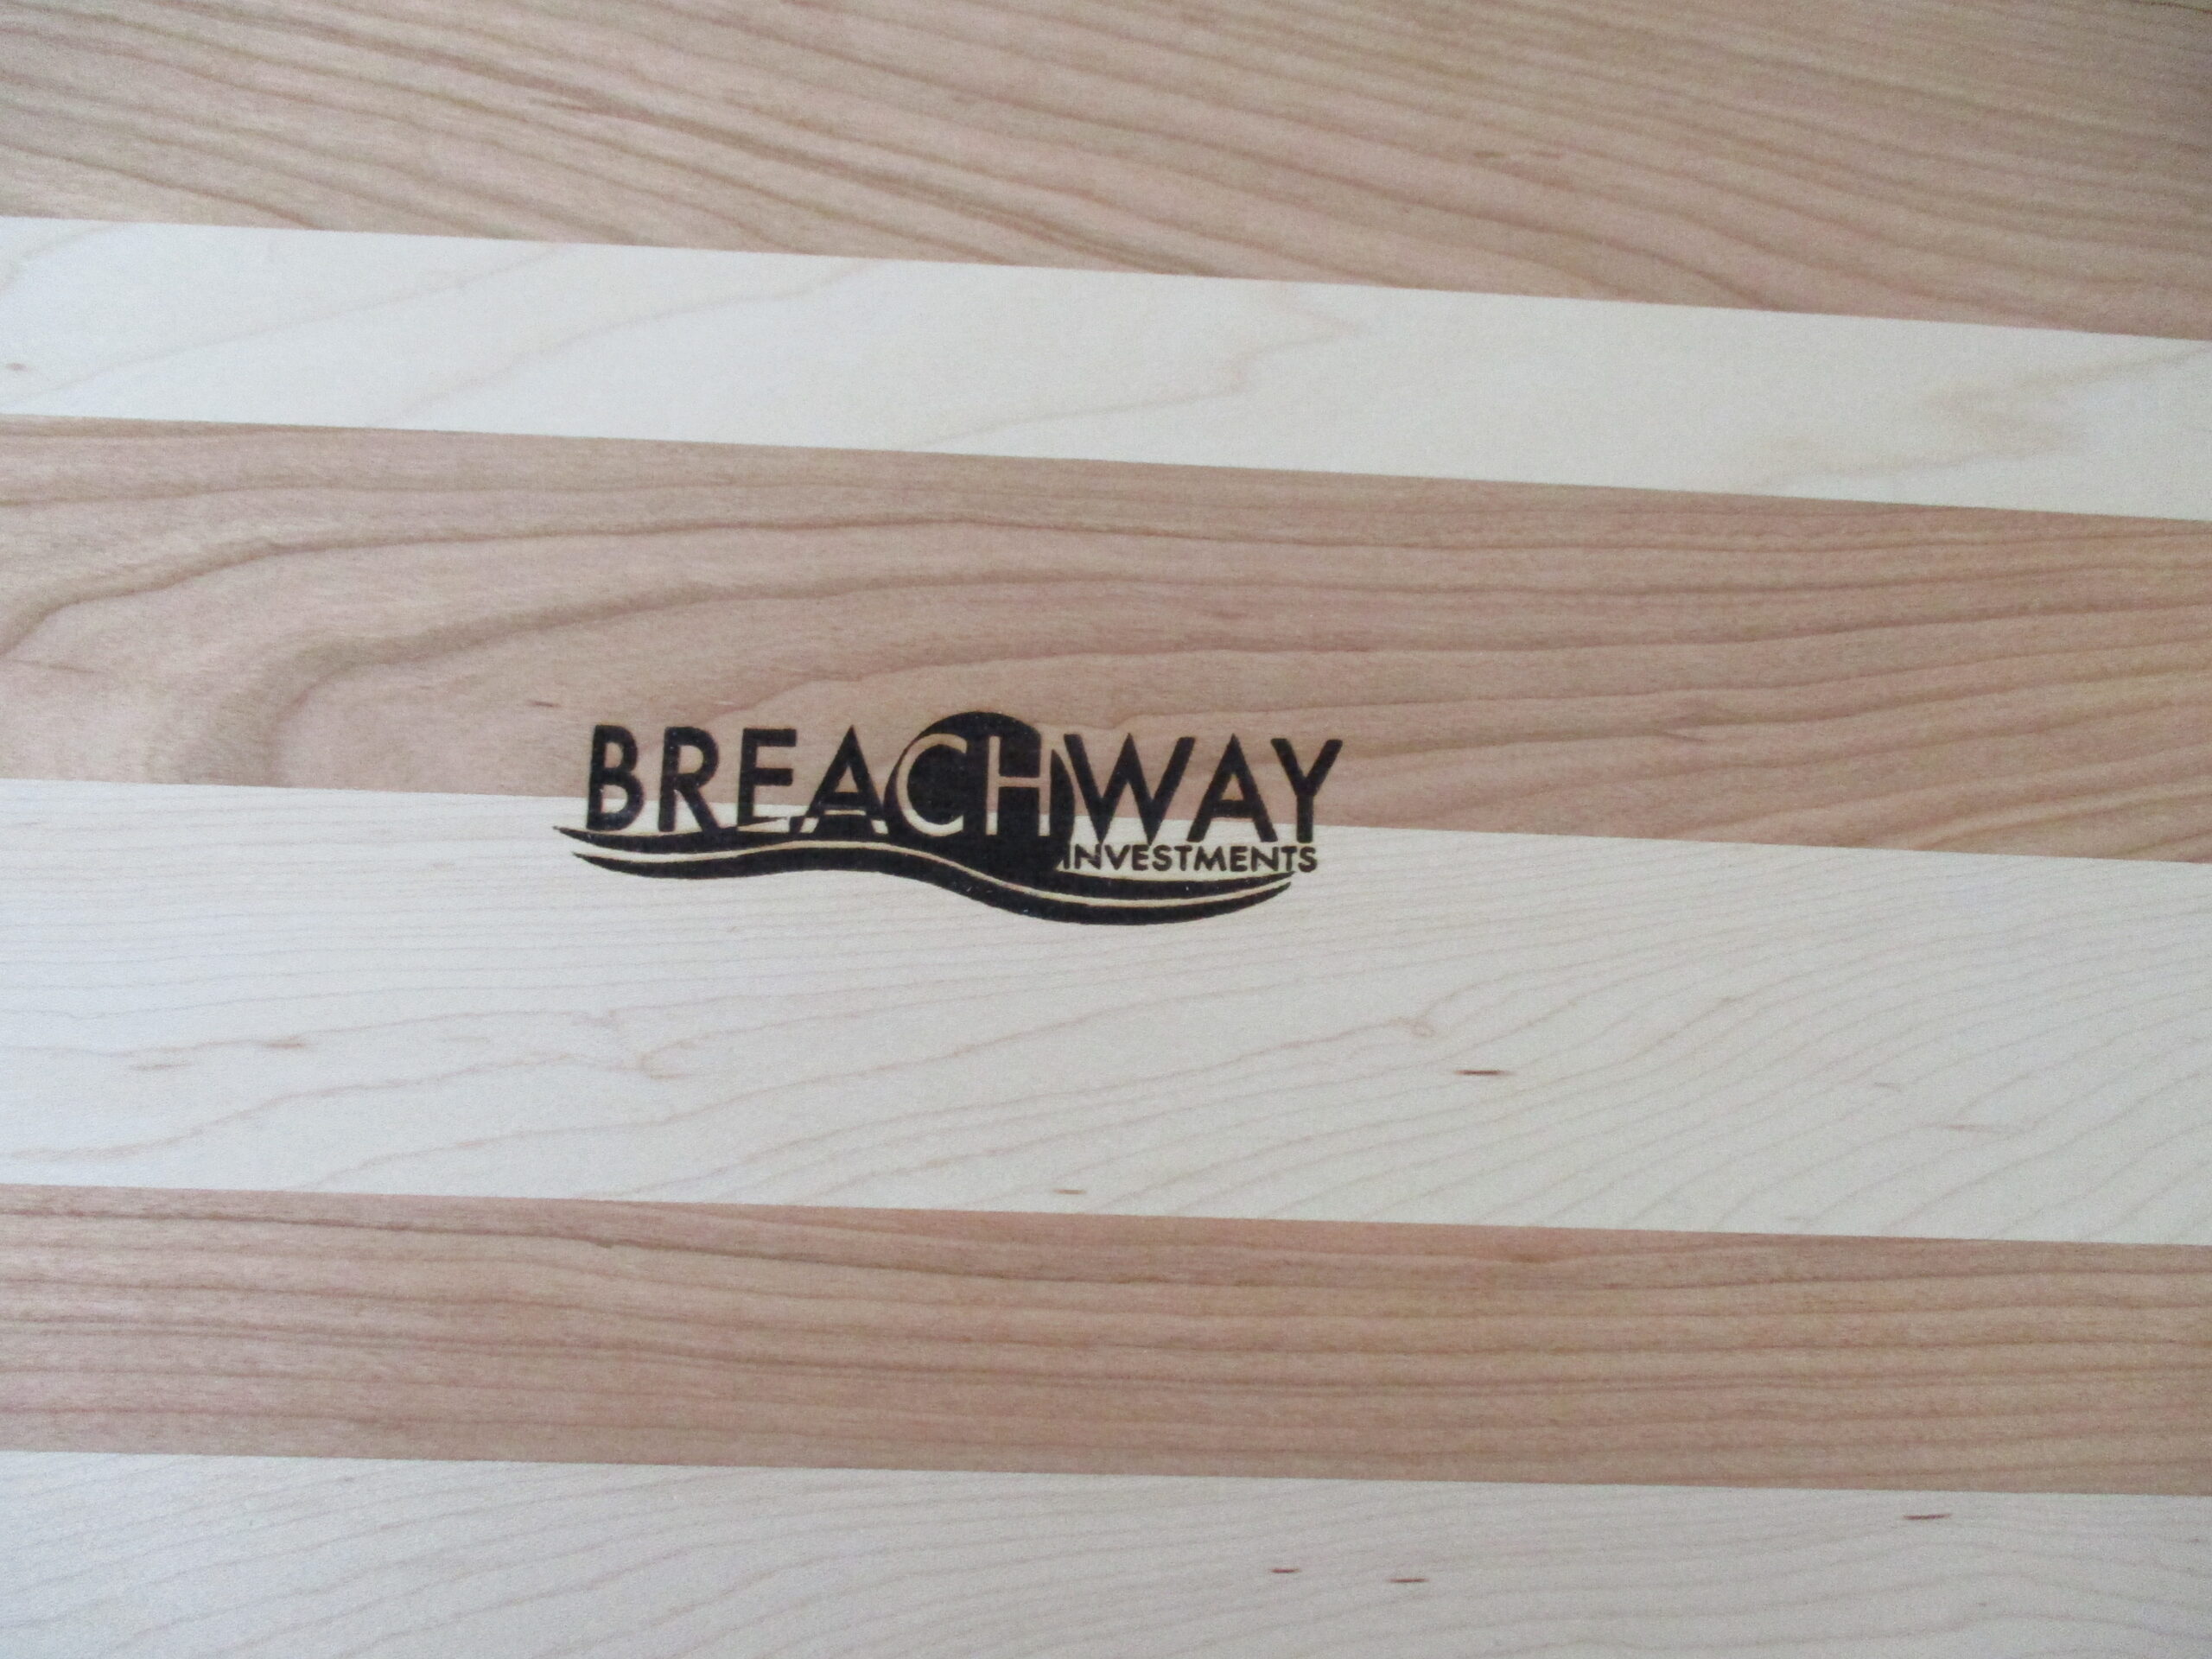 Company logo engraved on Maple and Cherry cutting board/charcuterie board as a promotional gift